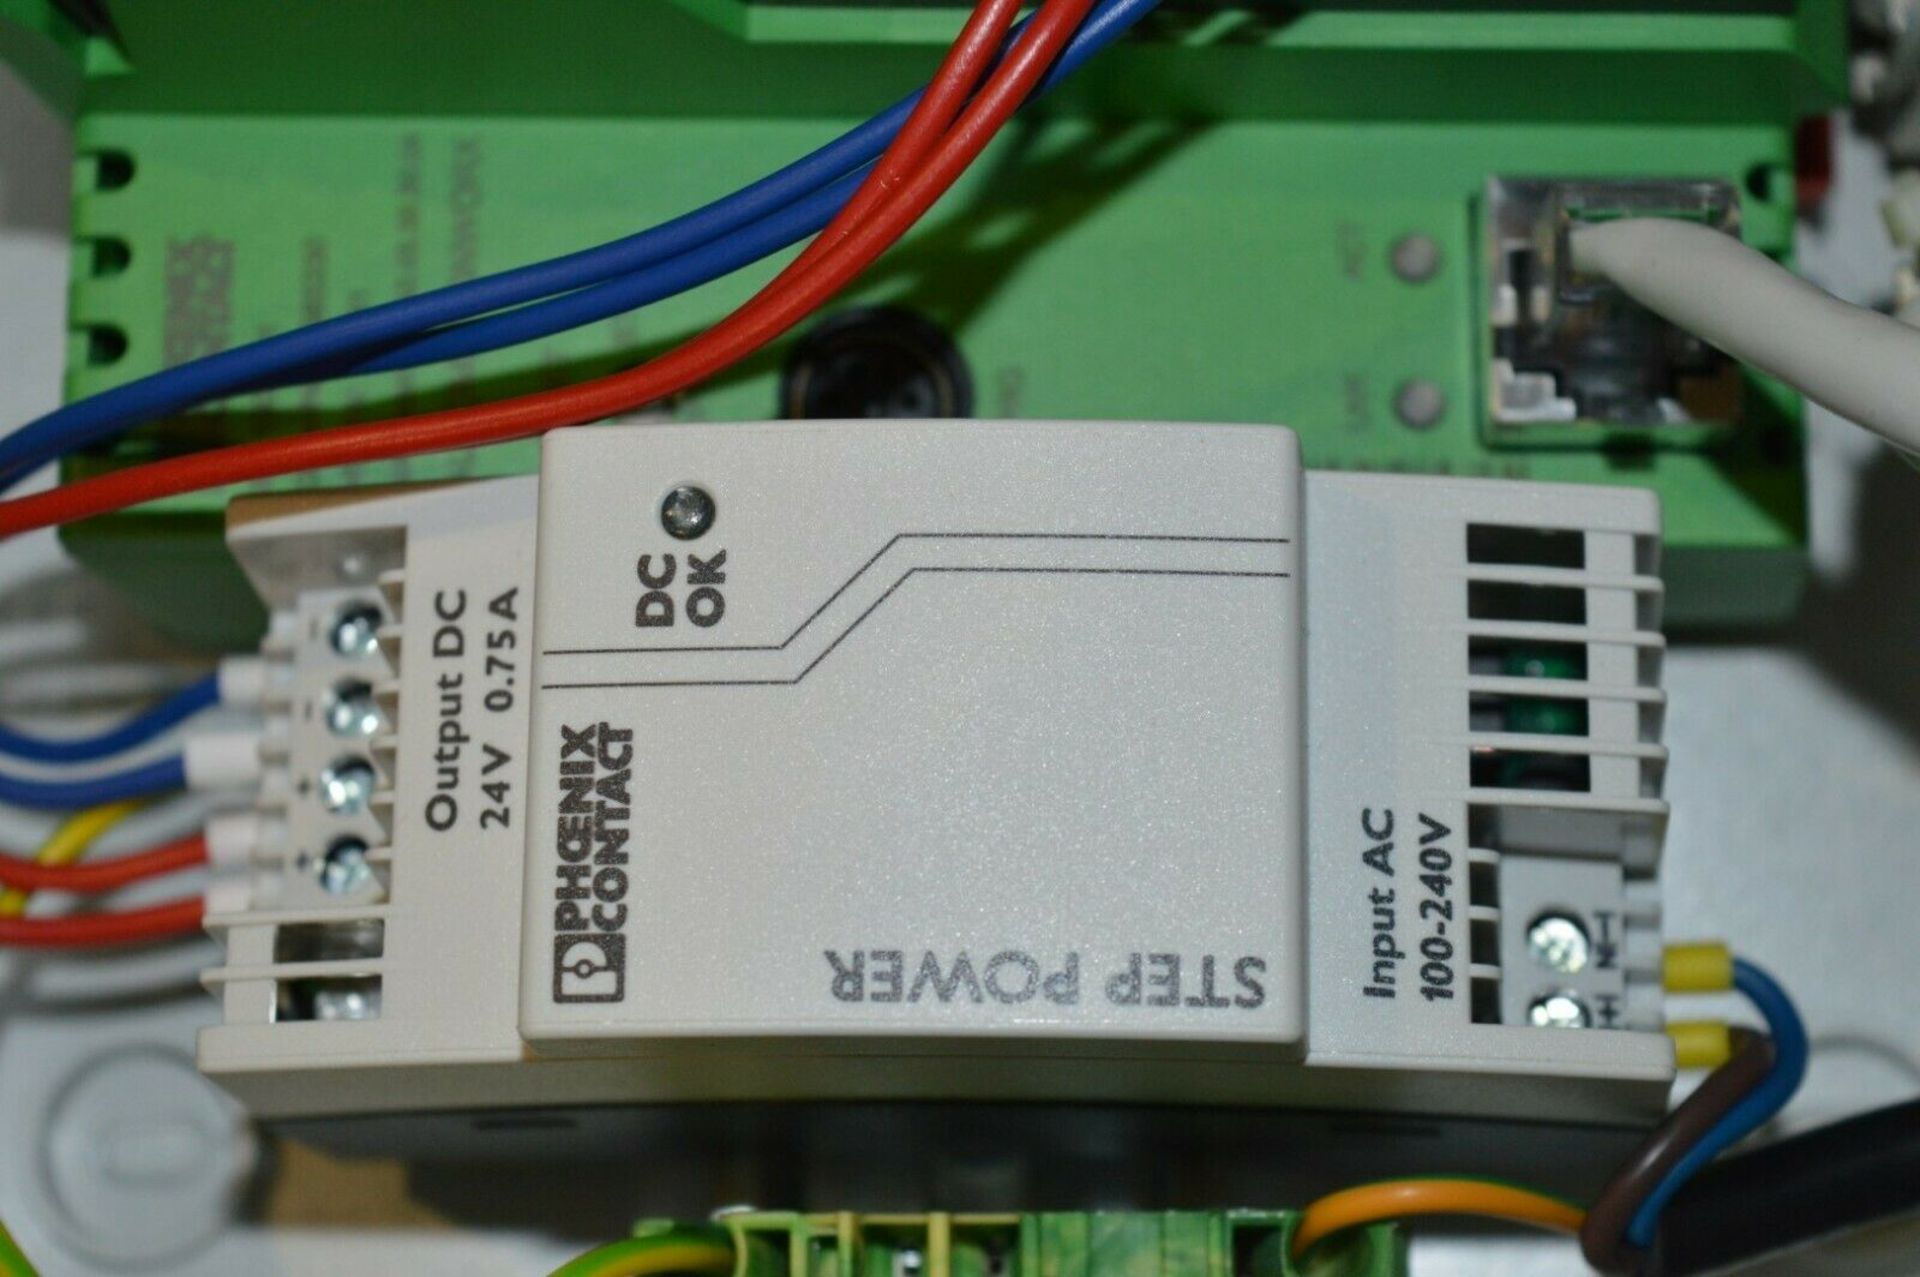 1 x Phoenix Contact Controller ILC 150 ETH 2985330 + Step Power and Enclosure - 240v UK Plug - WH1 - - Image 7 of 7